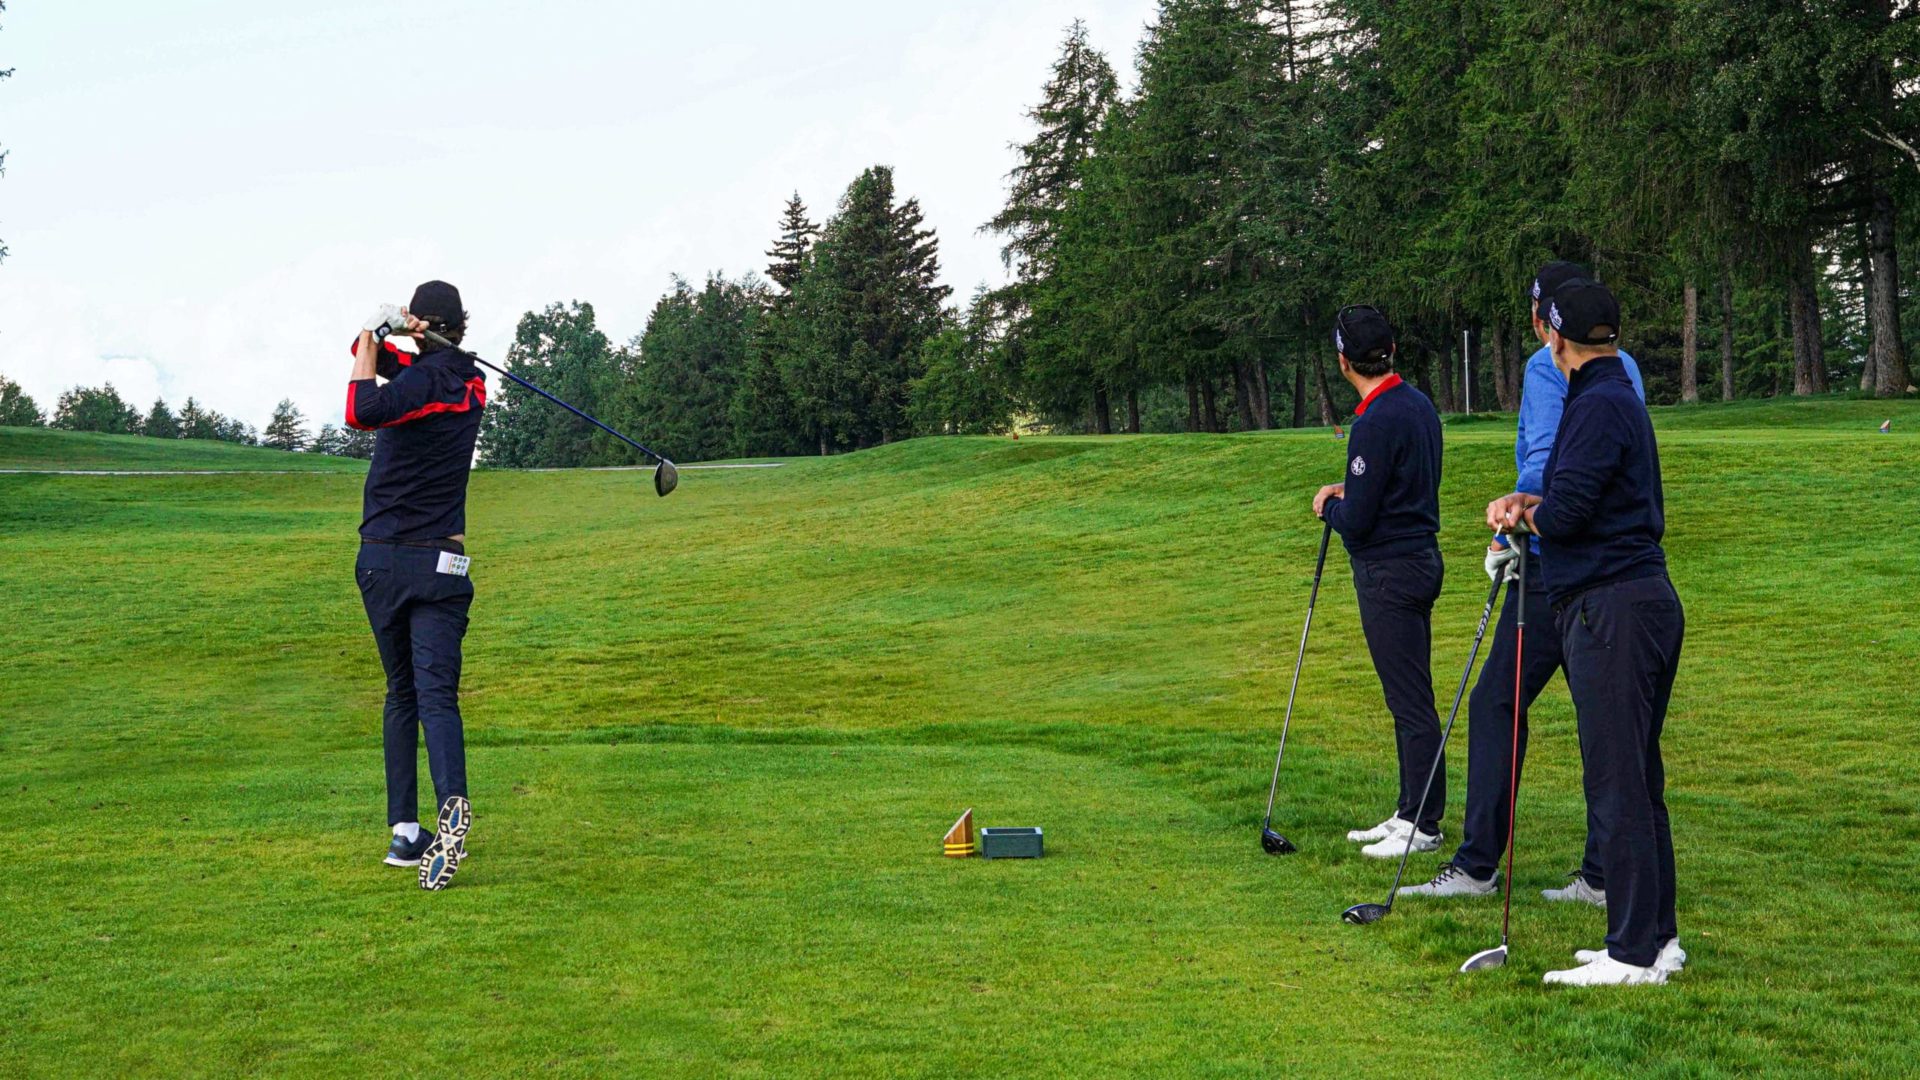 FGP Swiss & Alps was very proud to sponsor the yearly APACH golf tournament of Crans-Montana